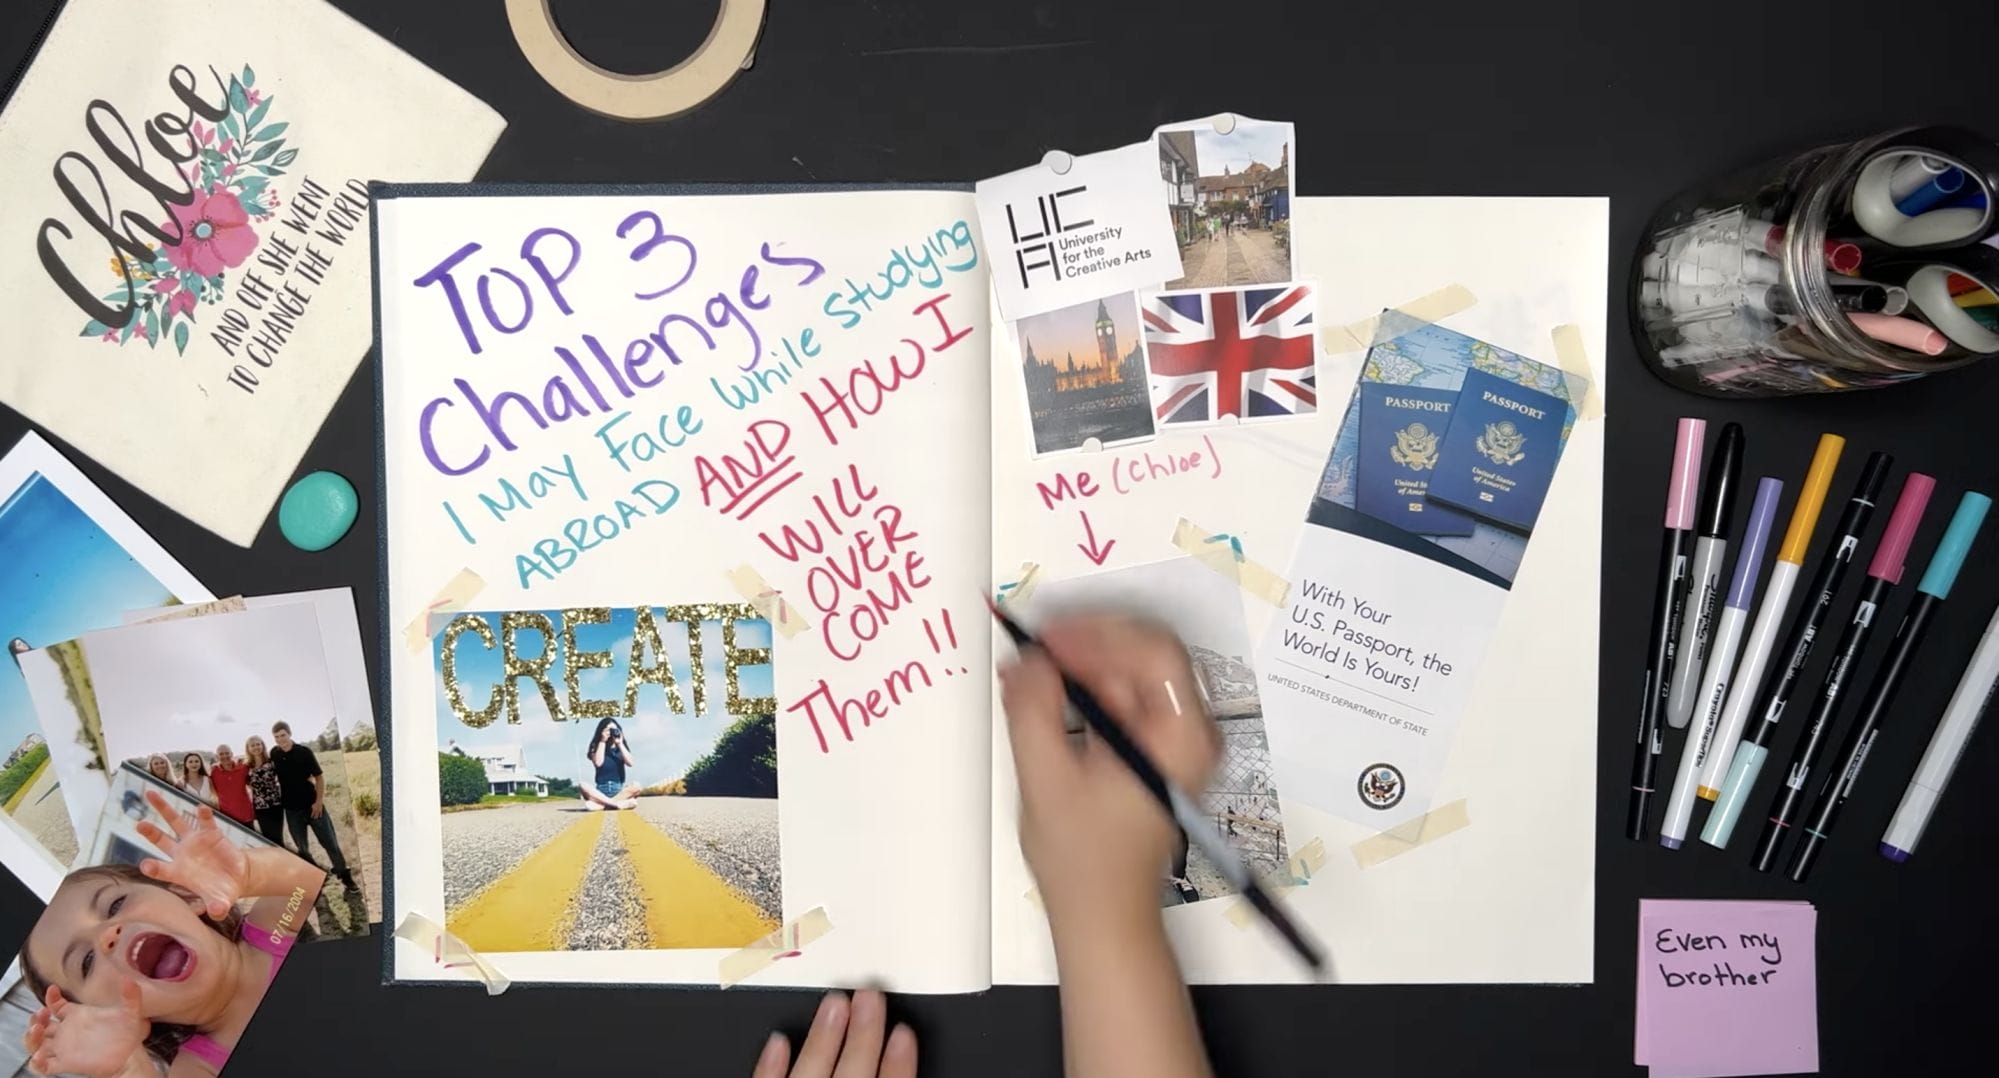 screenshot of a video still - a student writing in their journal "My Top 3 Challenges Abroad & How I'll Overcome Them"